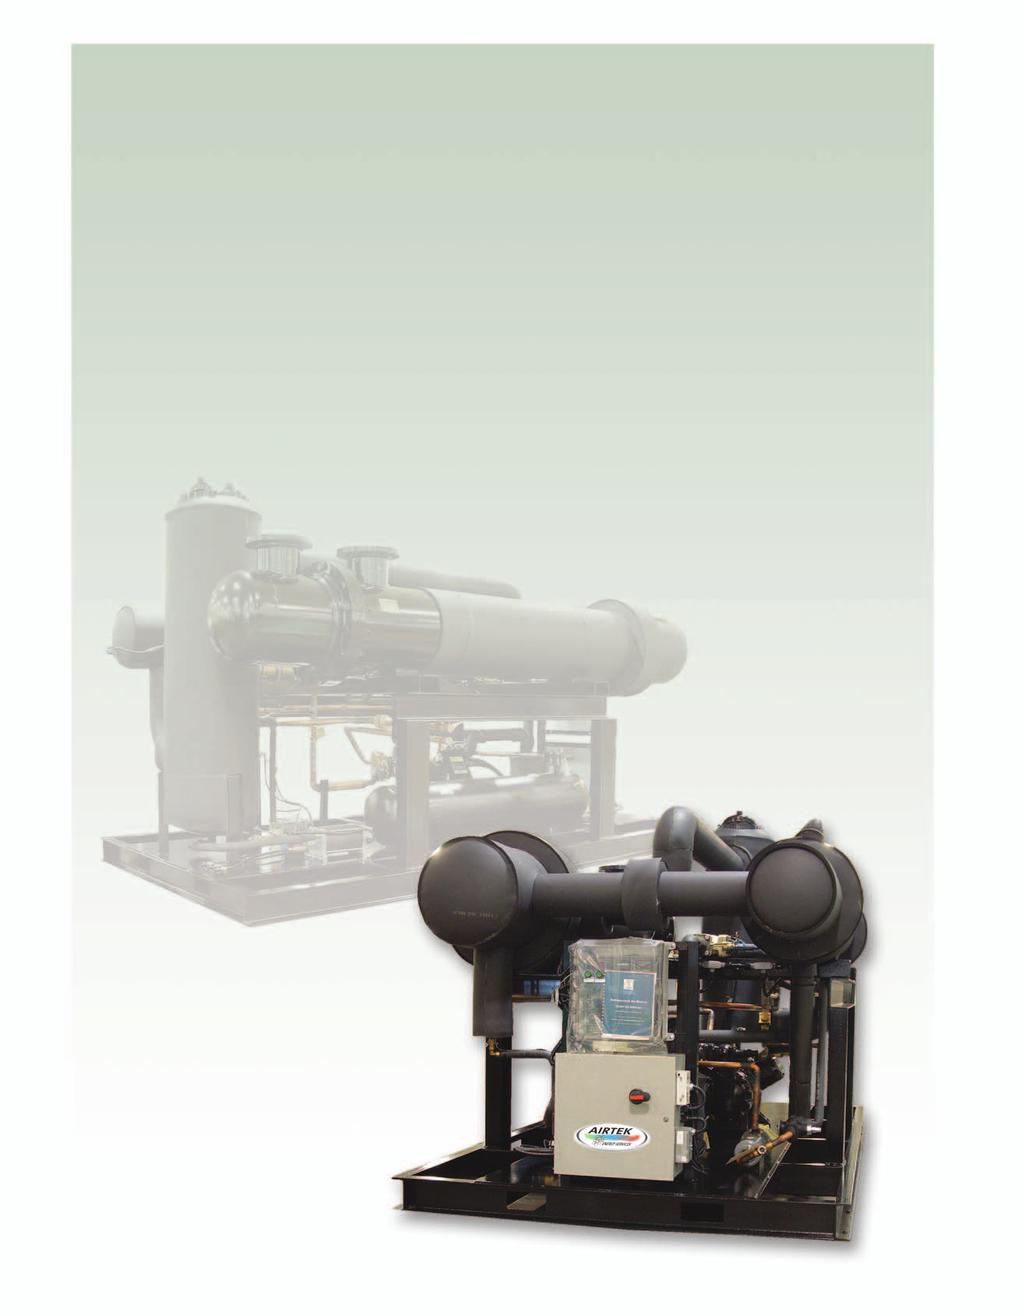 Landfill & Digester Gas Dryers Landfill gas is generated by the anaerobic decomposition of organic matter deposited in landfills.